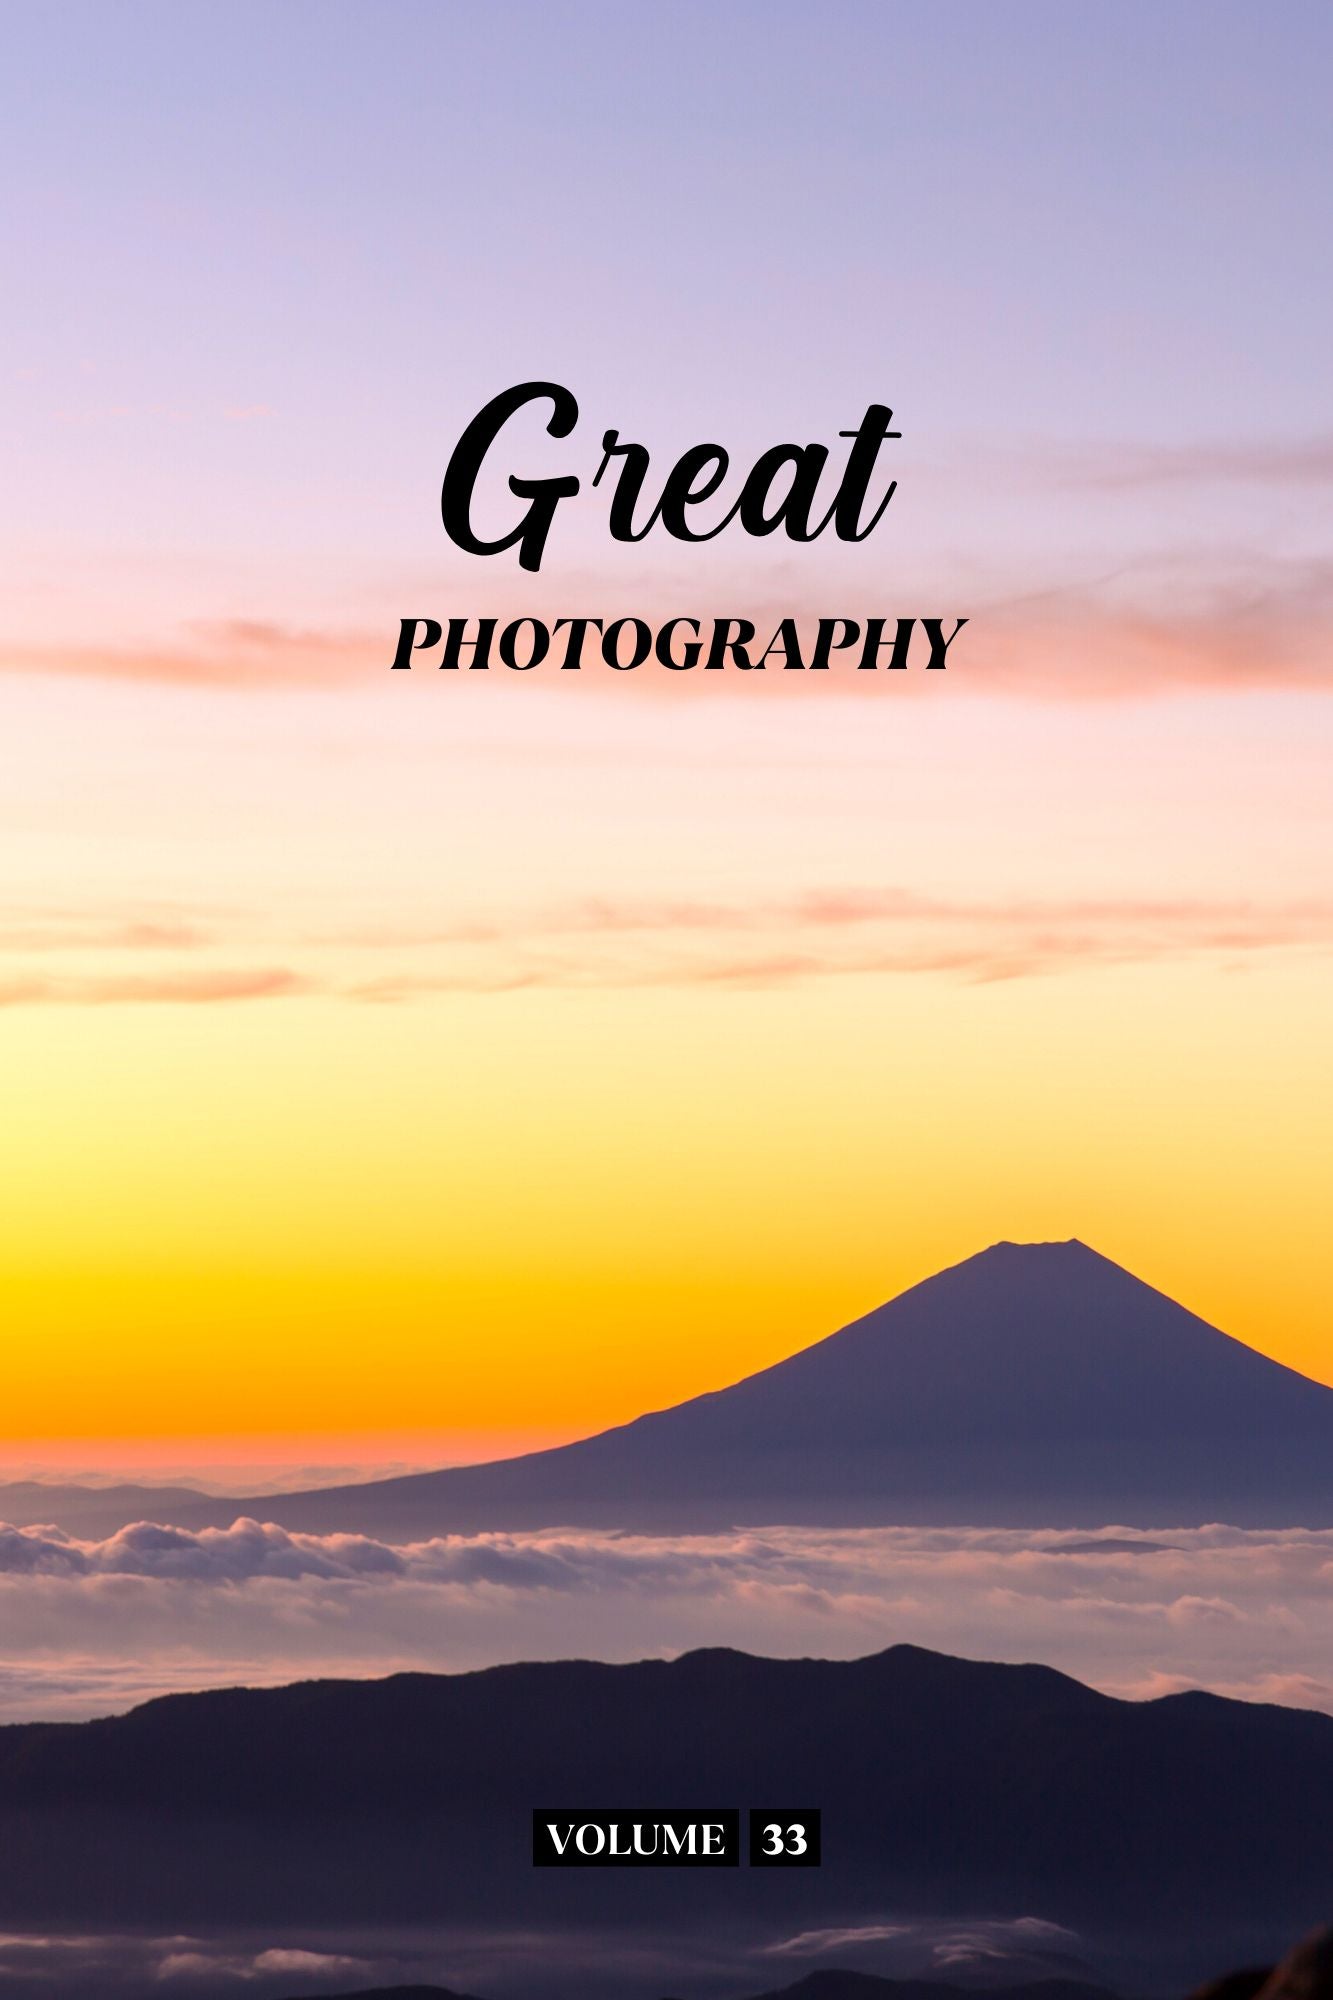 Great Photography Volume 33 (Physical Book Pre-Order)